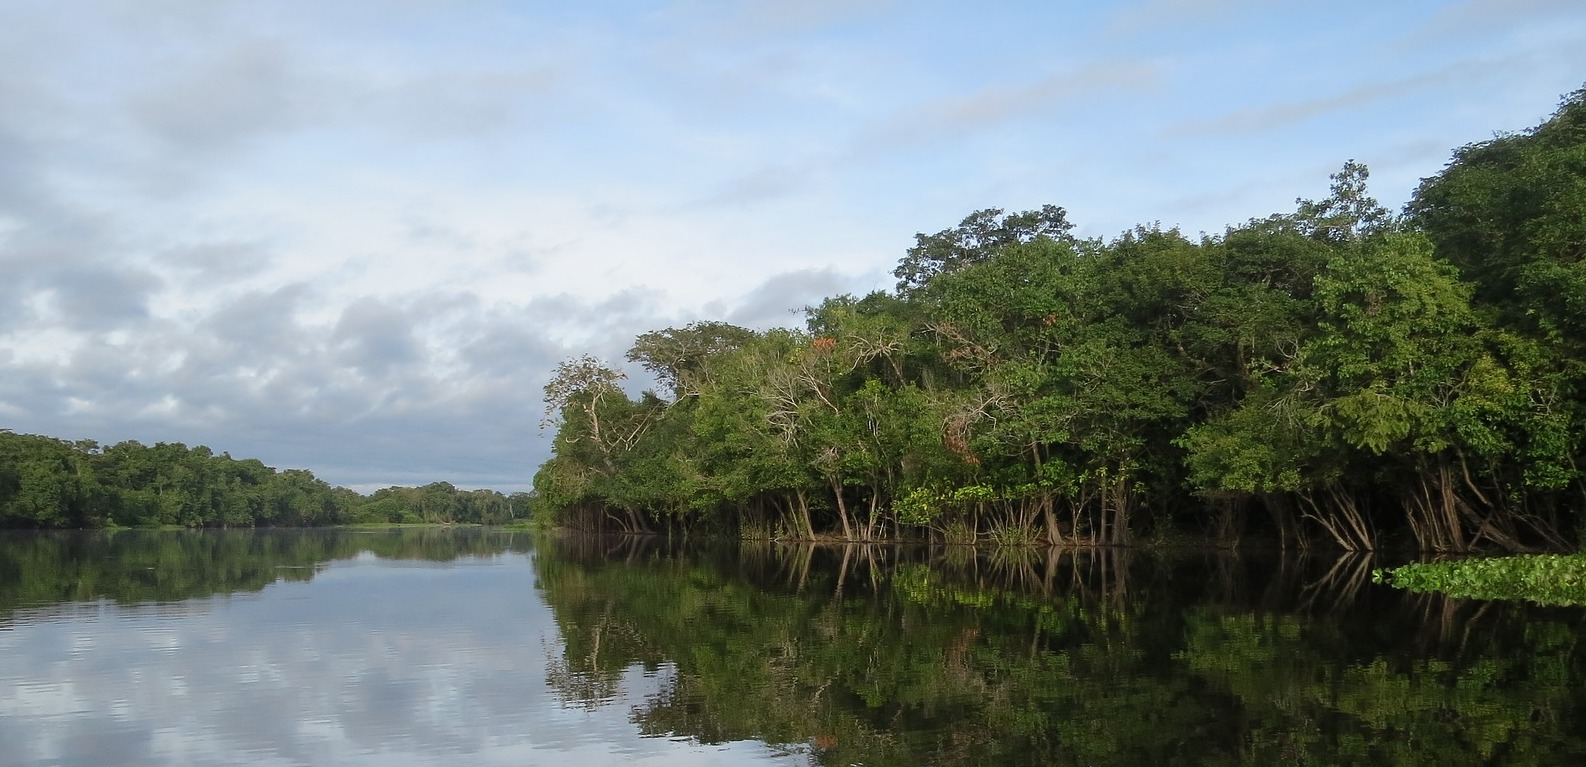 Research brief: Why record-breaking droughts had very different impacts on Amazon forests